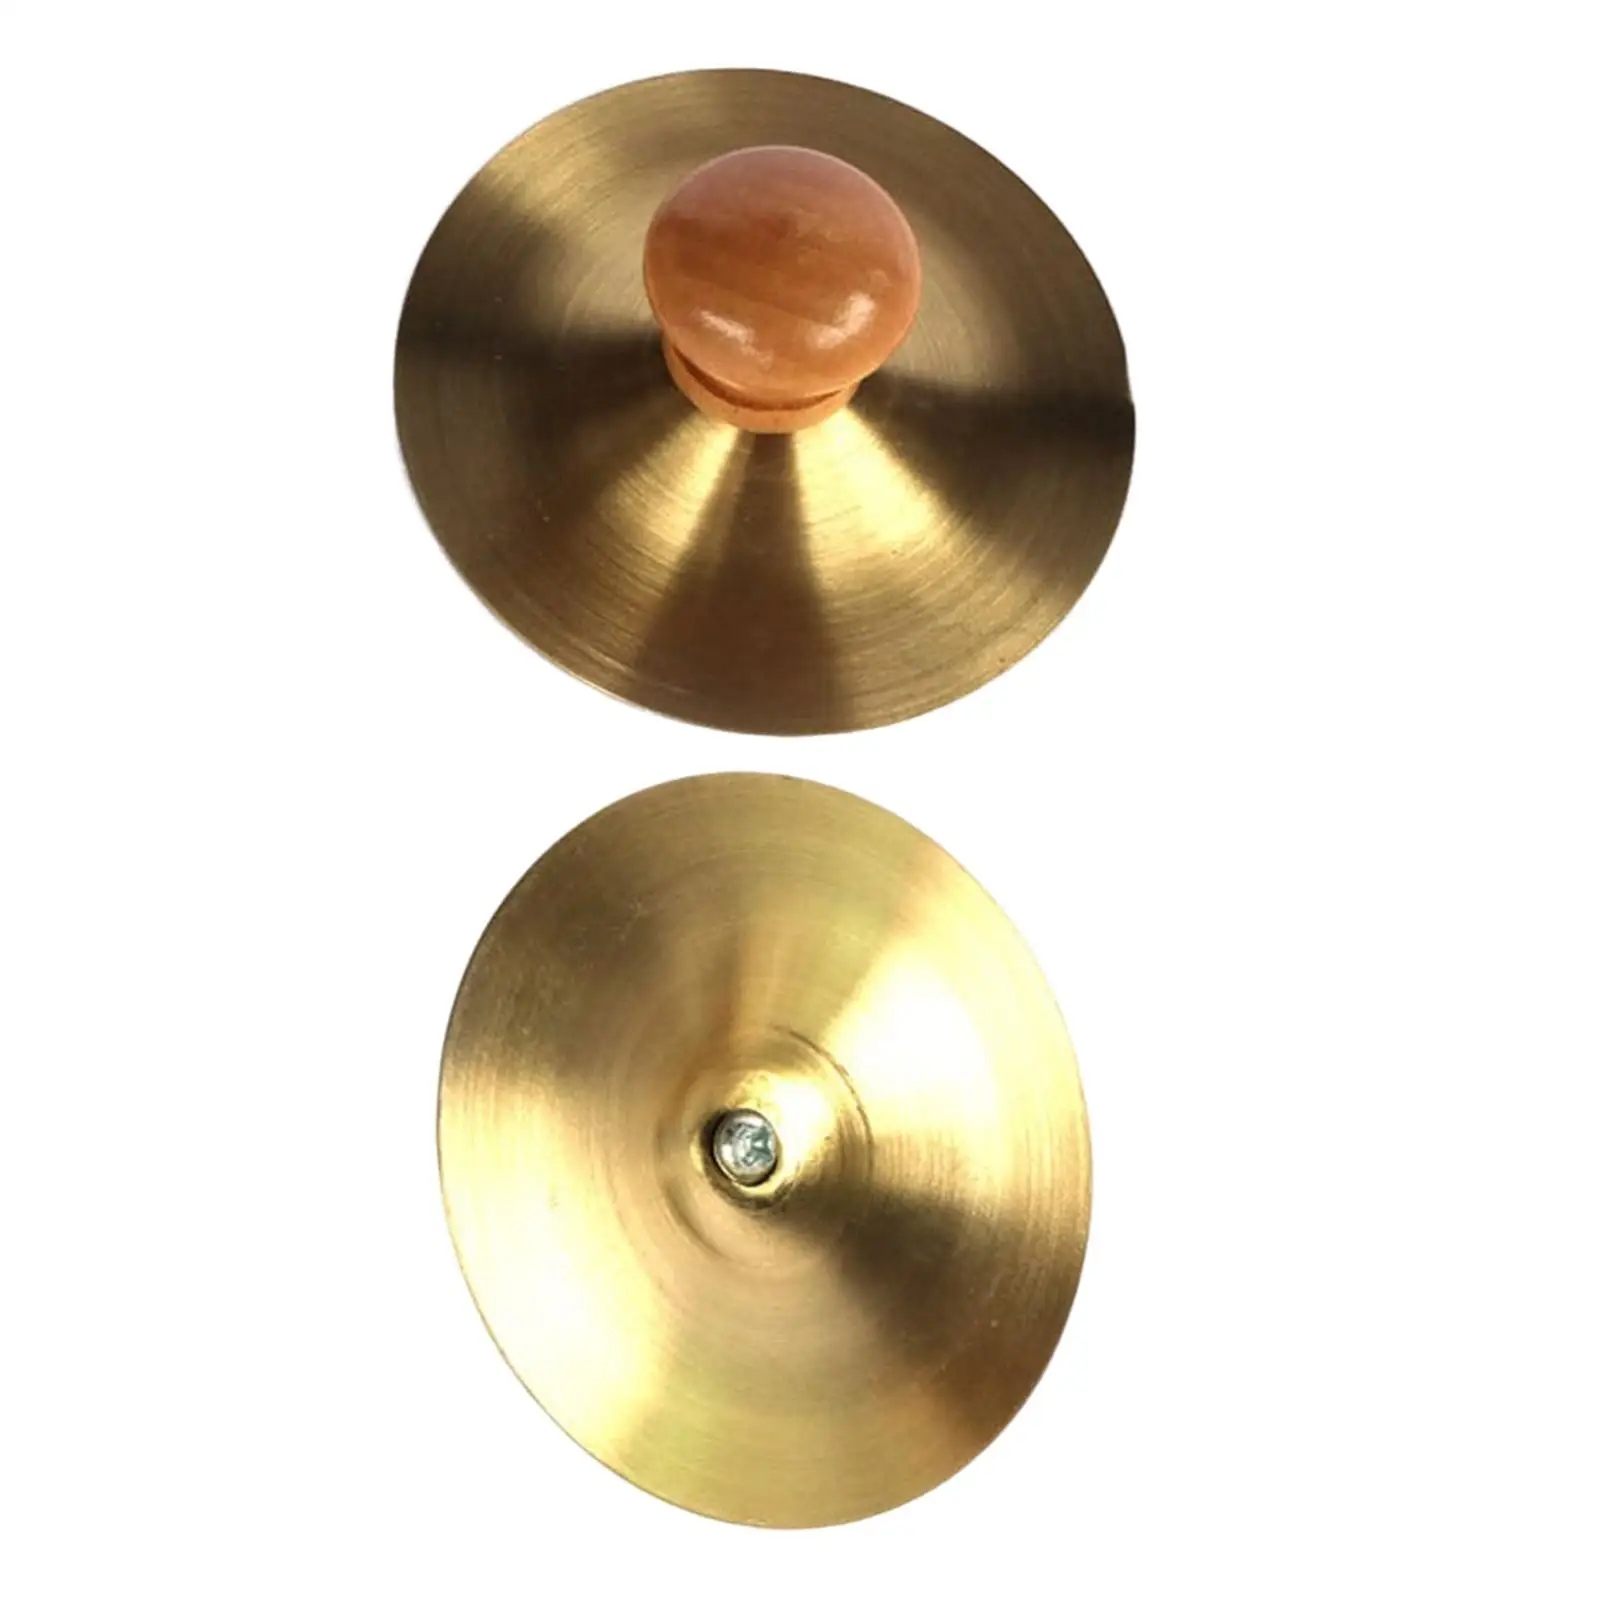 Finger Cymbals Kids Toy Developmental Early Learning Hand Eye Coordination Educational Copper Hand Cymbals for Children Gifts